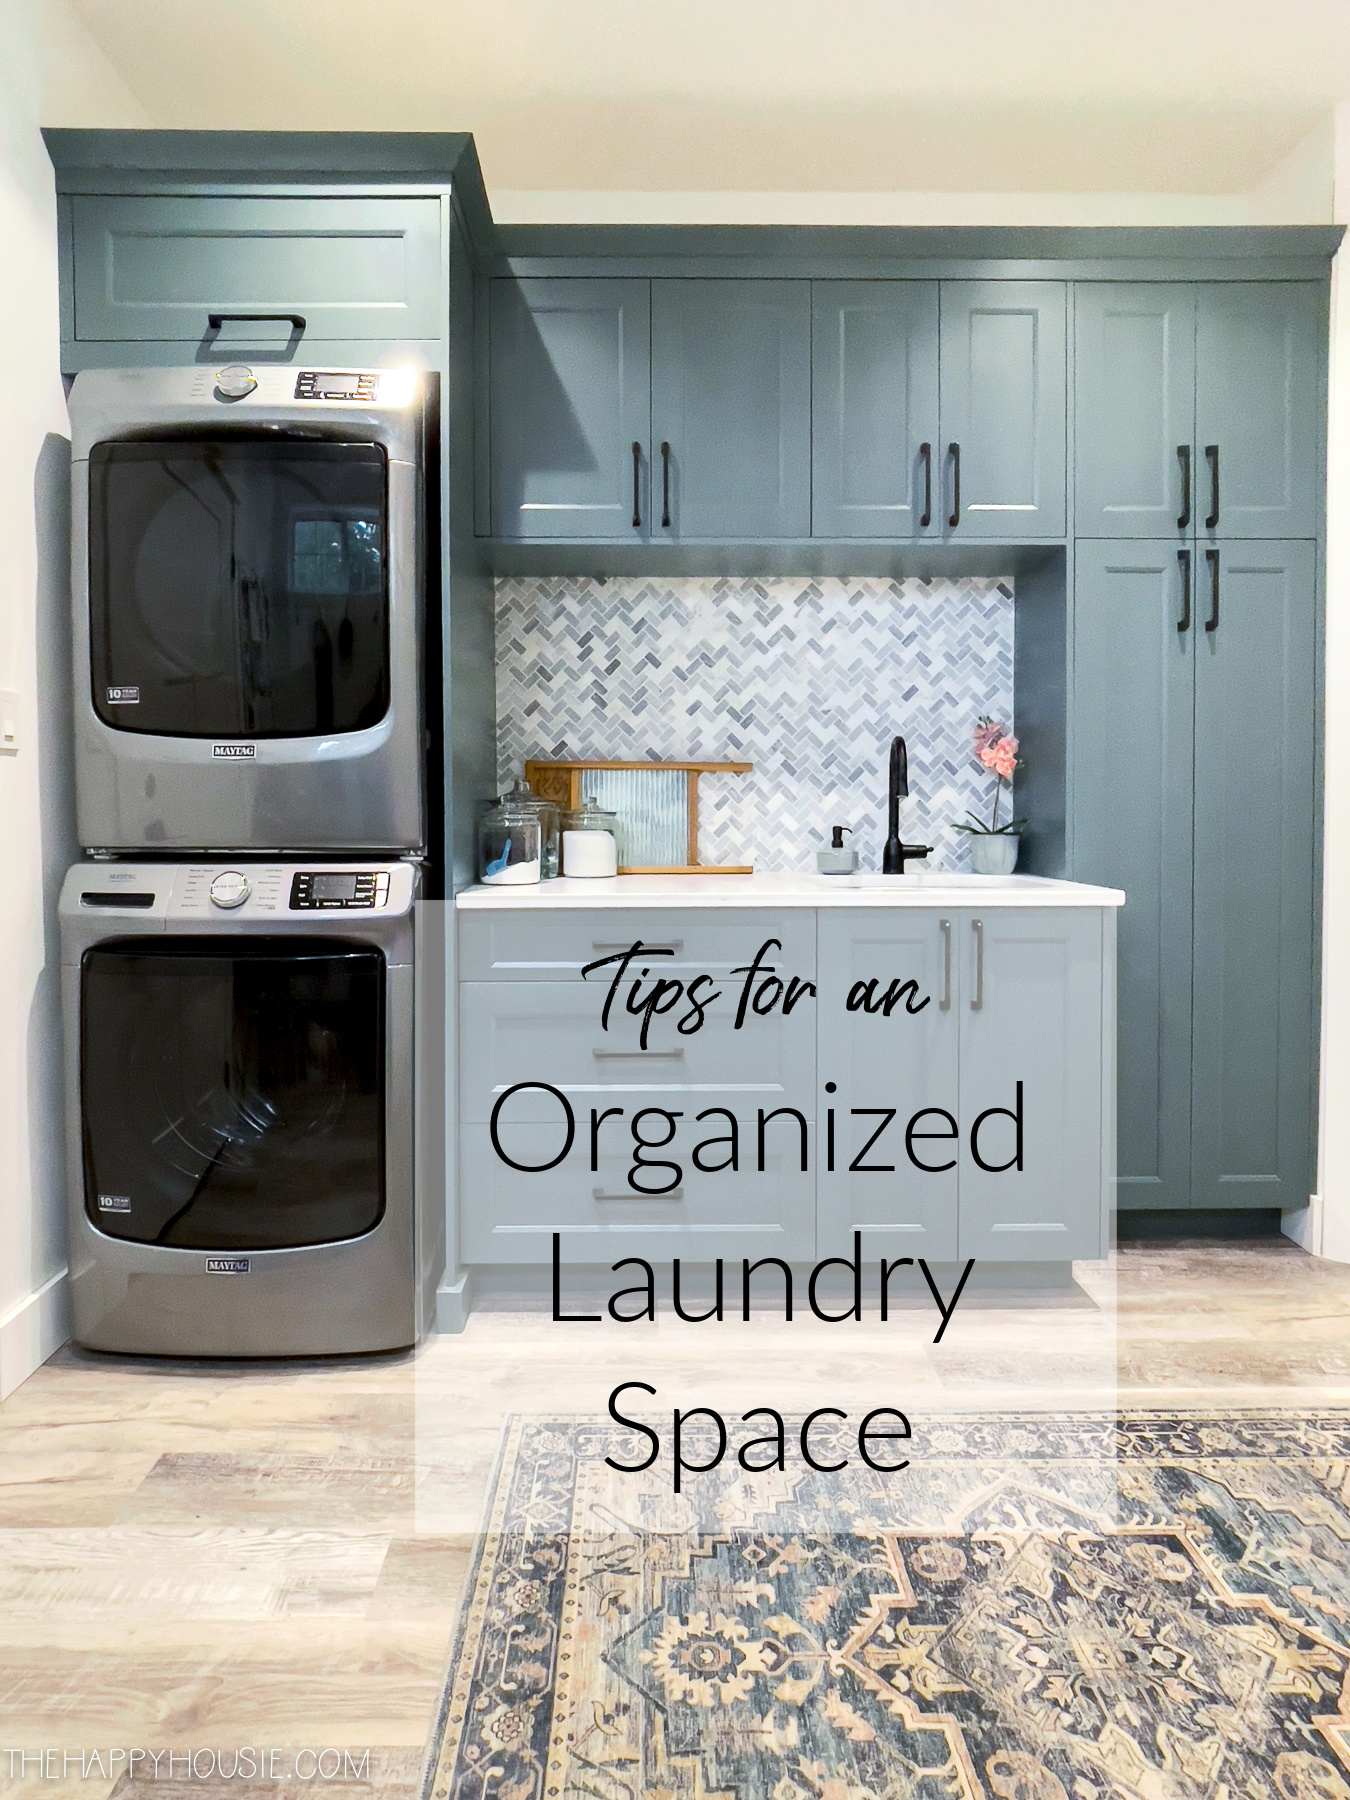 Tips For an Organized Laundry Space graphic.